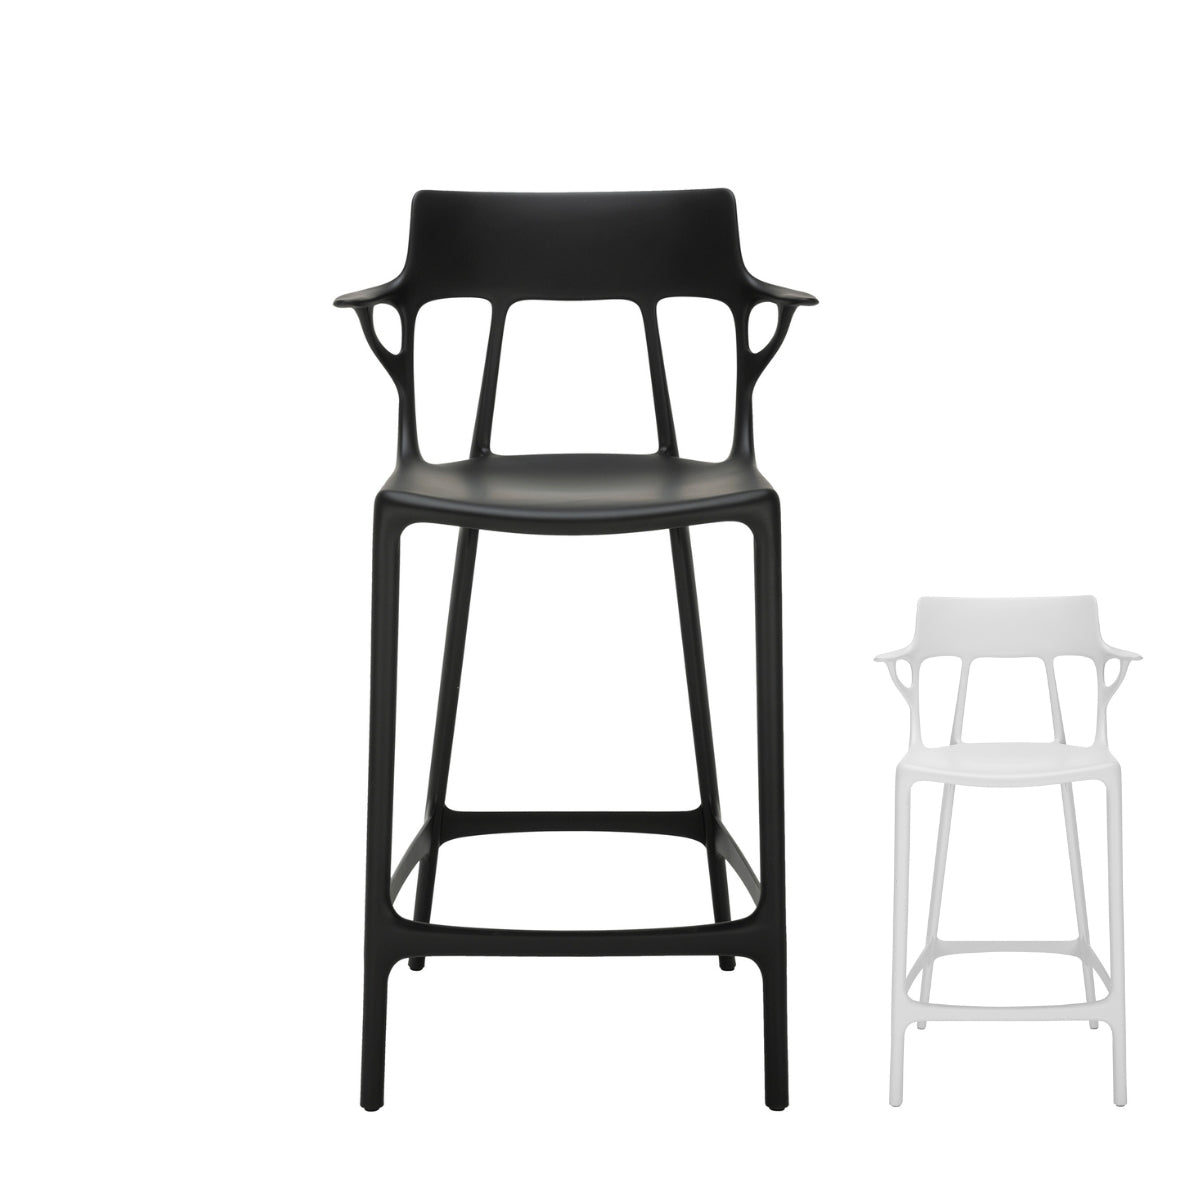 A.I. Stool Recycled - Kartell